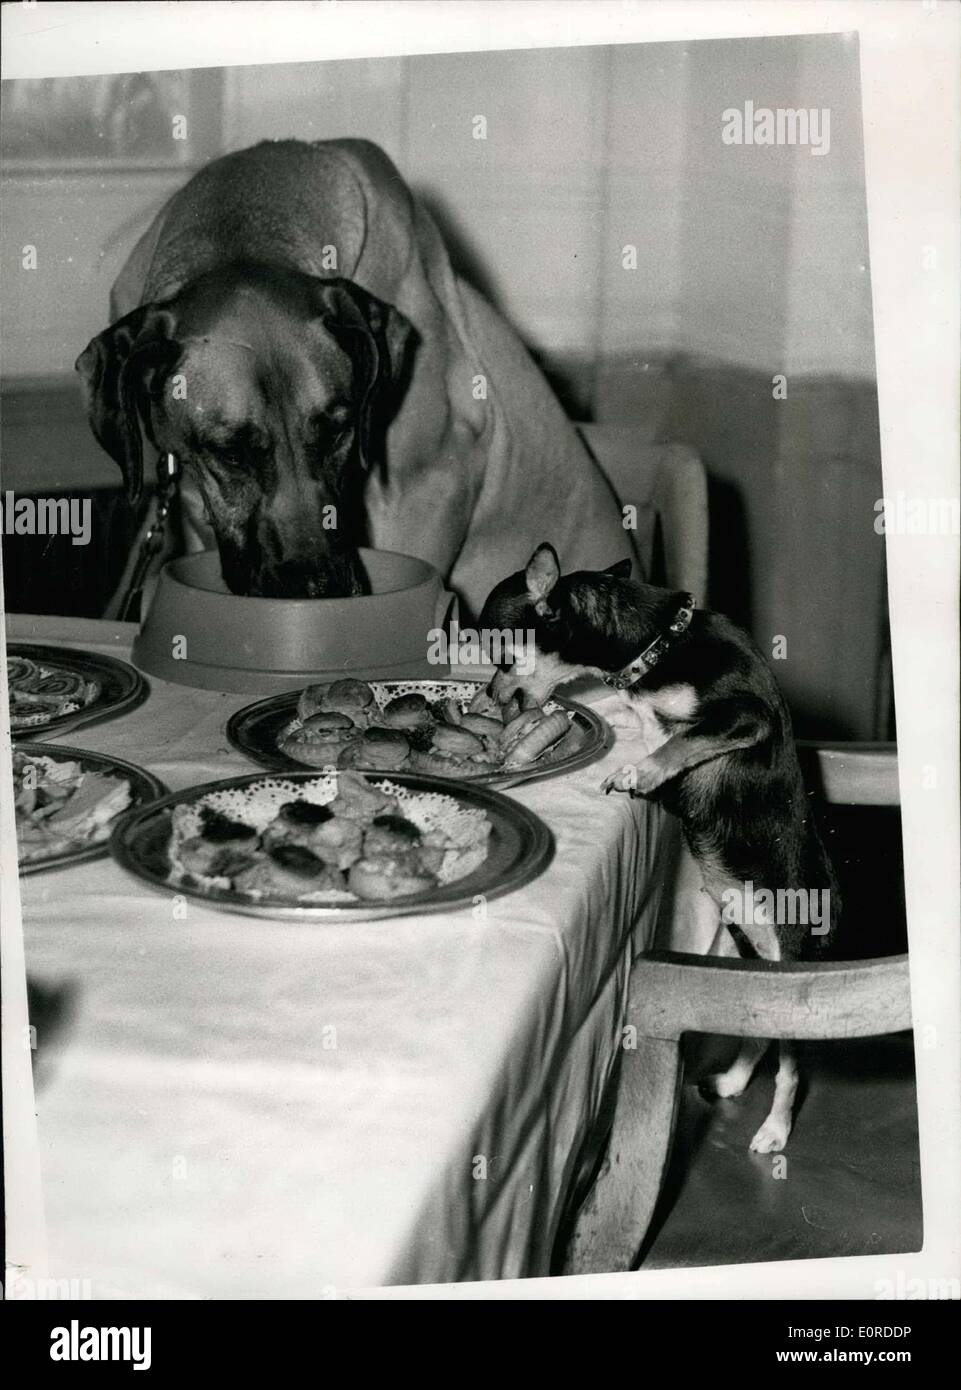 Mar. 05, 1959 - 5-3-59 Canine Insurance Association's Dog's Dinner . Kim , an eight-months old black Cocker Spaniel was the guest of honour at the Dog's Dinner held today to celebrate the silver Jubilee Year of the Canine Insurance Association. Together with his master, Mr. Archie Brown, of Eastbourne, he was chosen by Dennis Price, the film actor, as winner of the Association's Silver Jubilee Award last week. For Kim it meant V.I.P Stock Photo